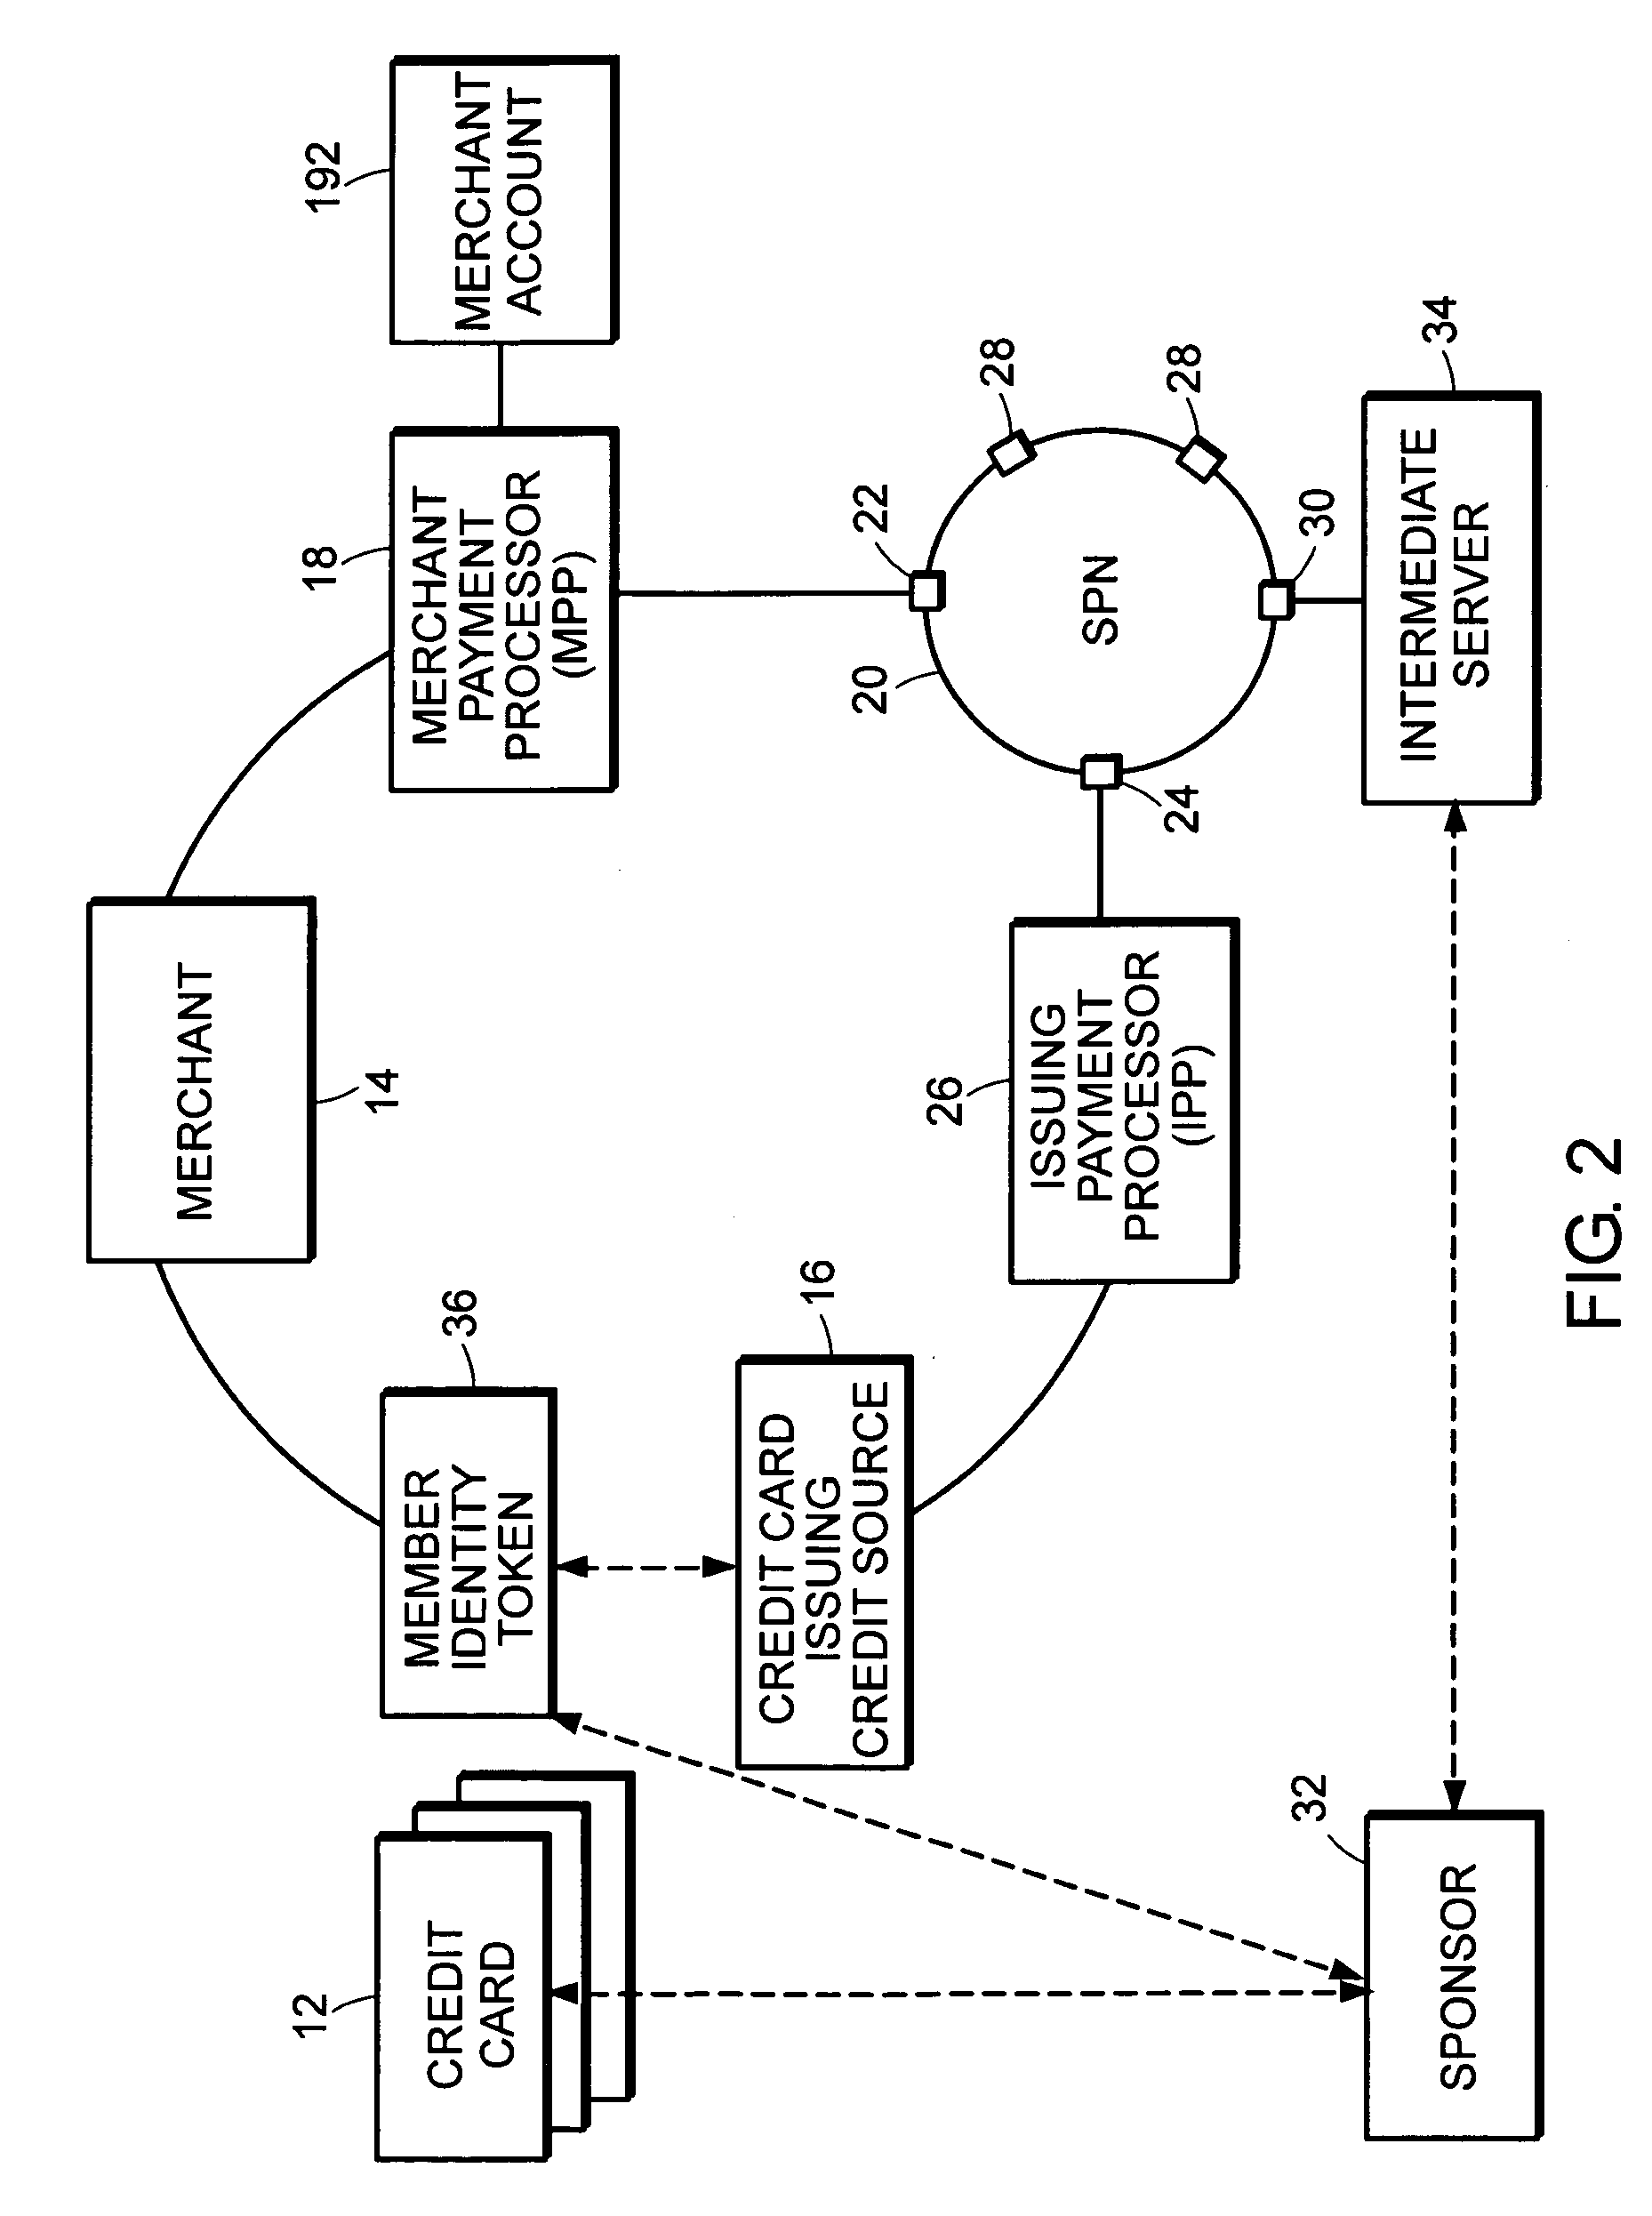 Method and system for processing financial transactions